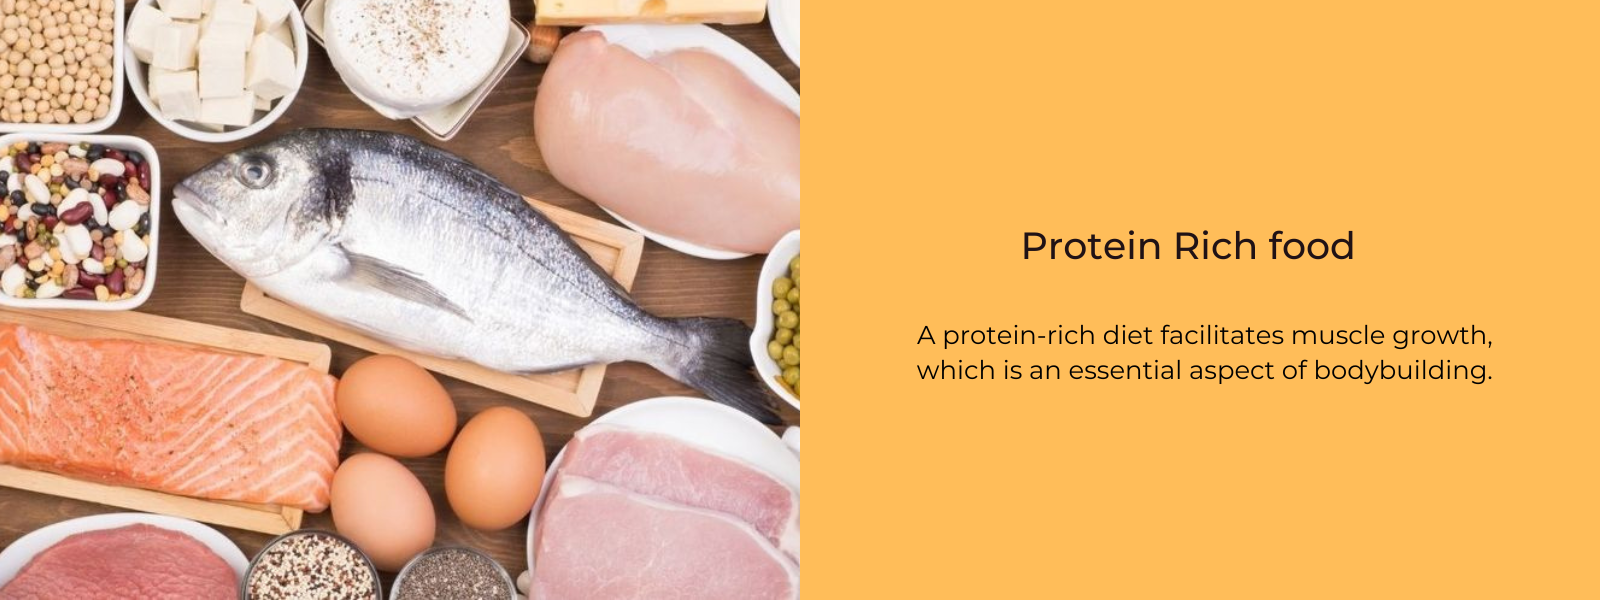 Protein Rich food – Health Benefits, Uses and Important Facts